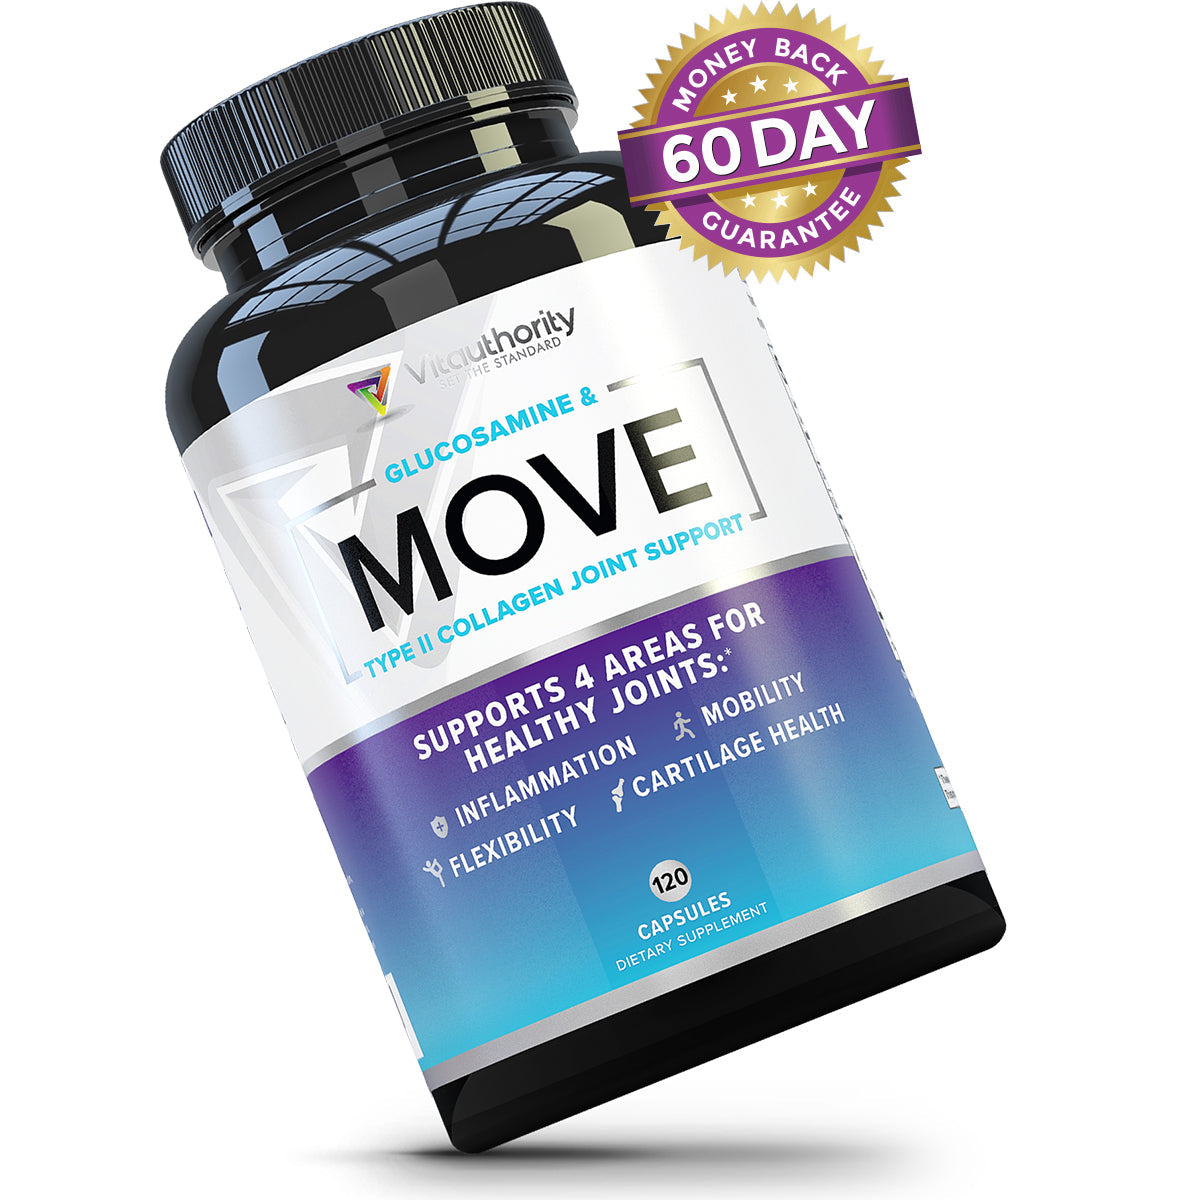 Move Premium Joint Support